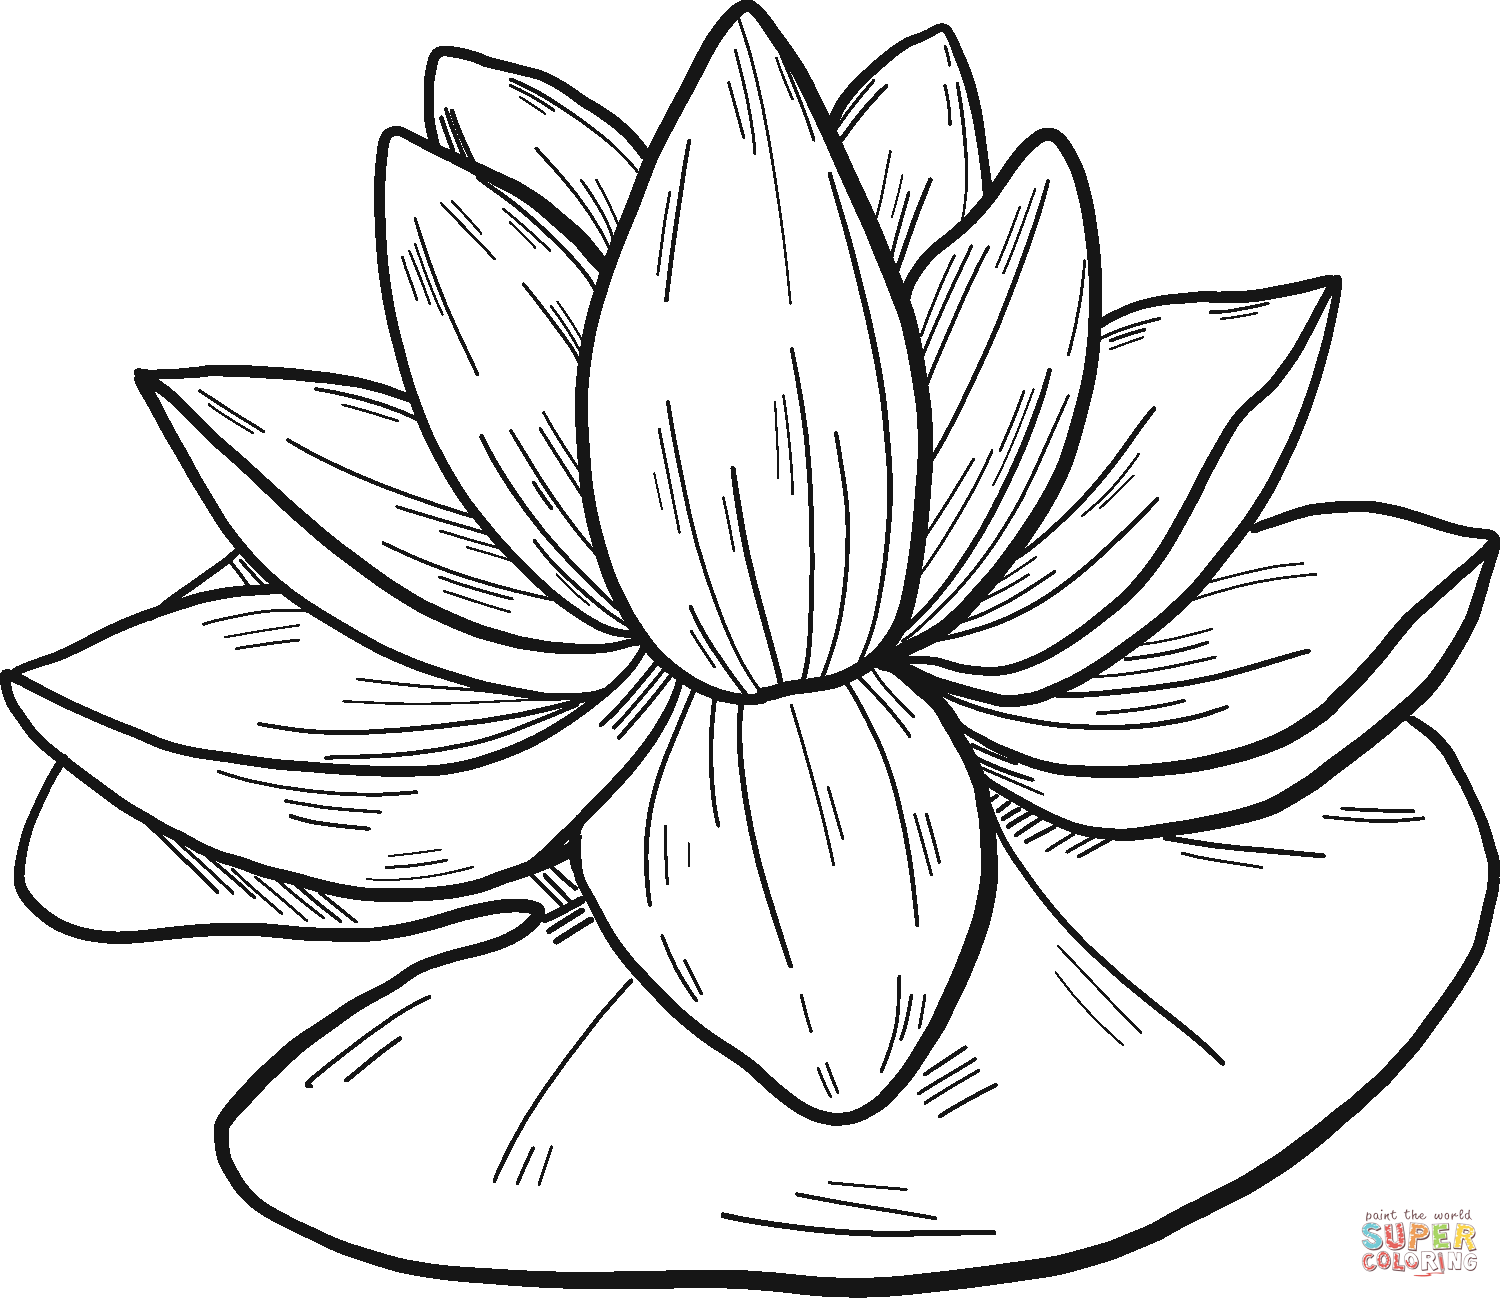 Water Lily coloring page | Free Printable Coloring Pages